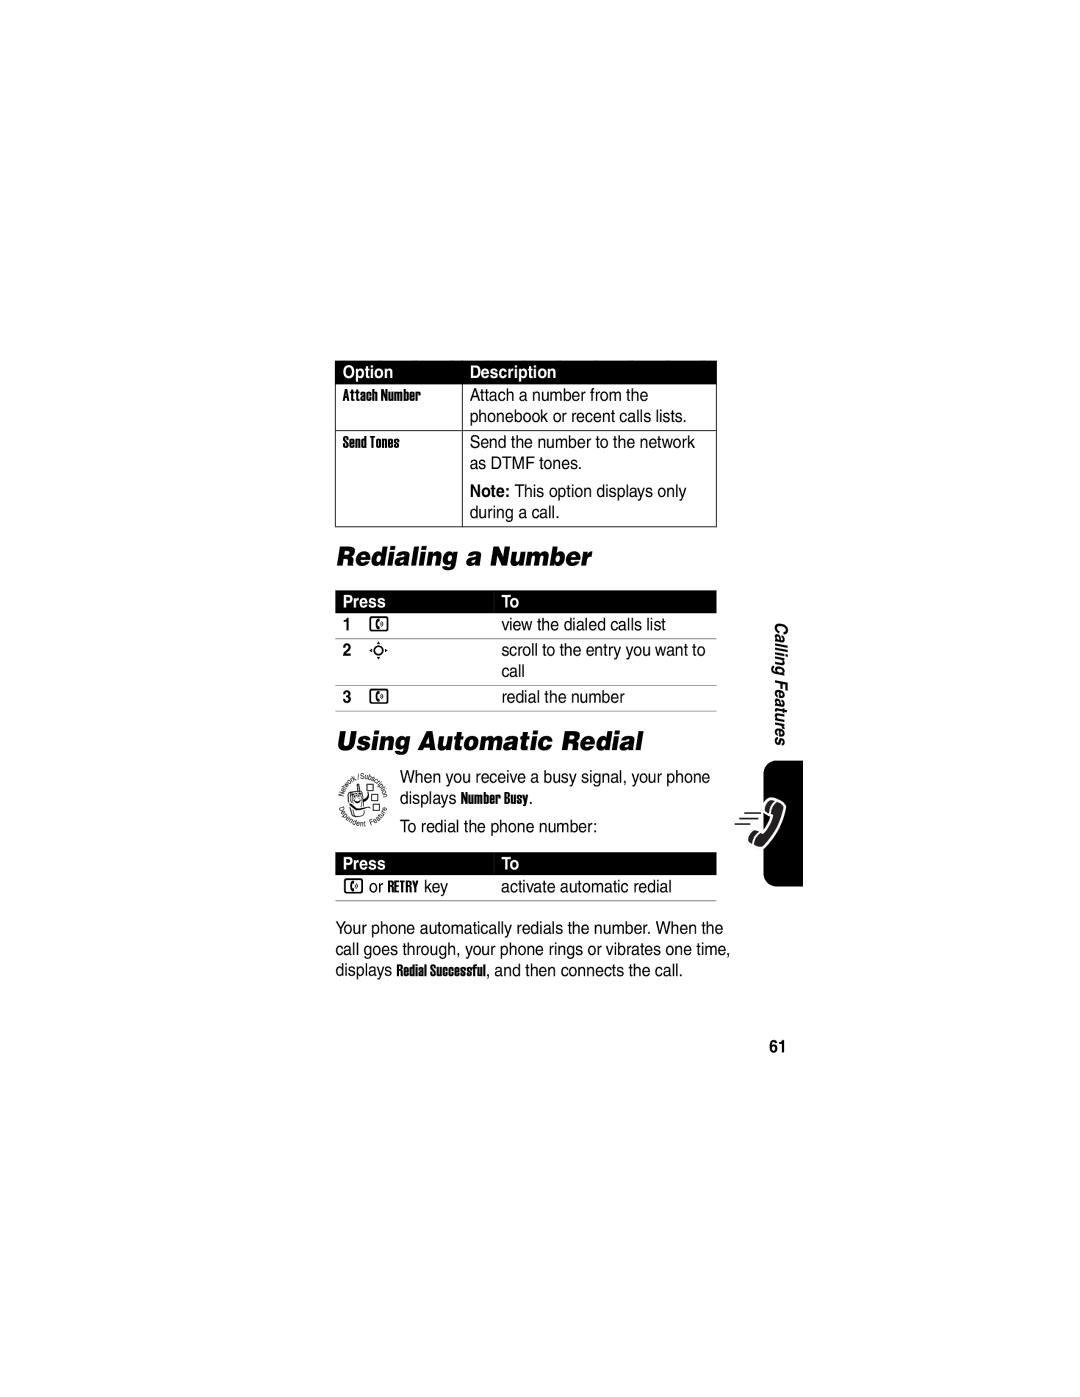 Motorola V330 manual Redialing a Number, Using Automatic Redial 